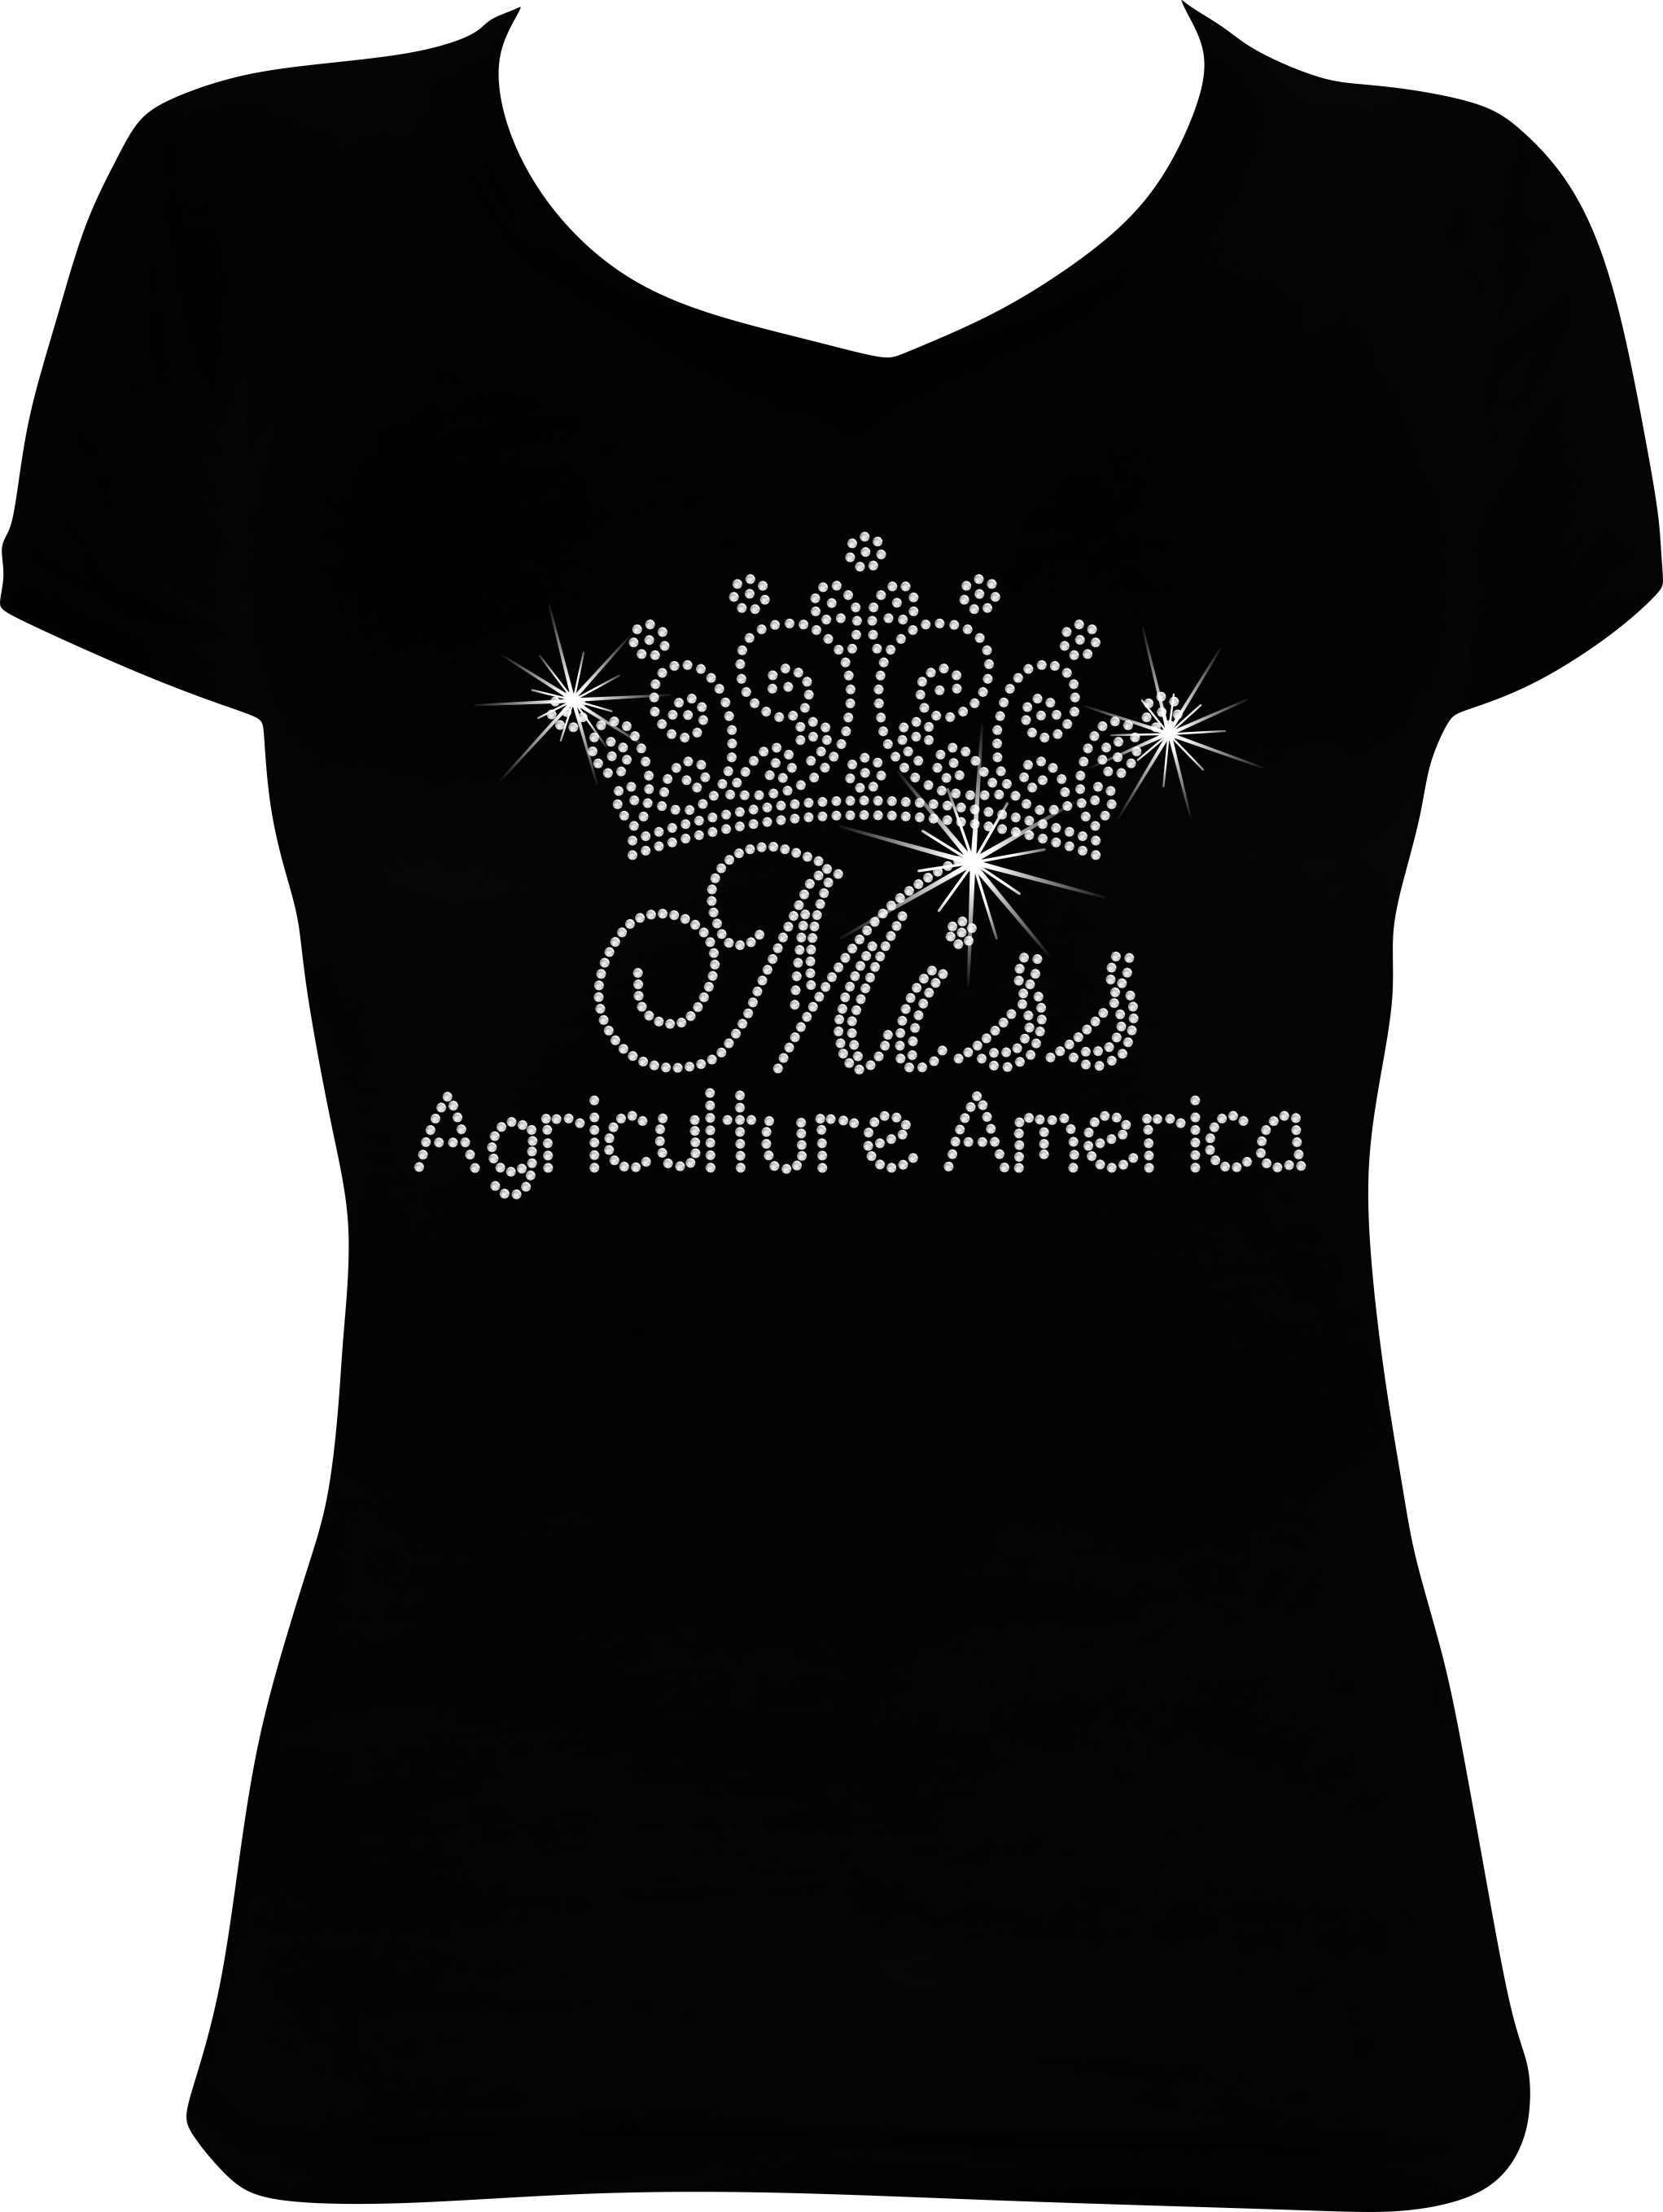 Miss Agriculture America Shirt